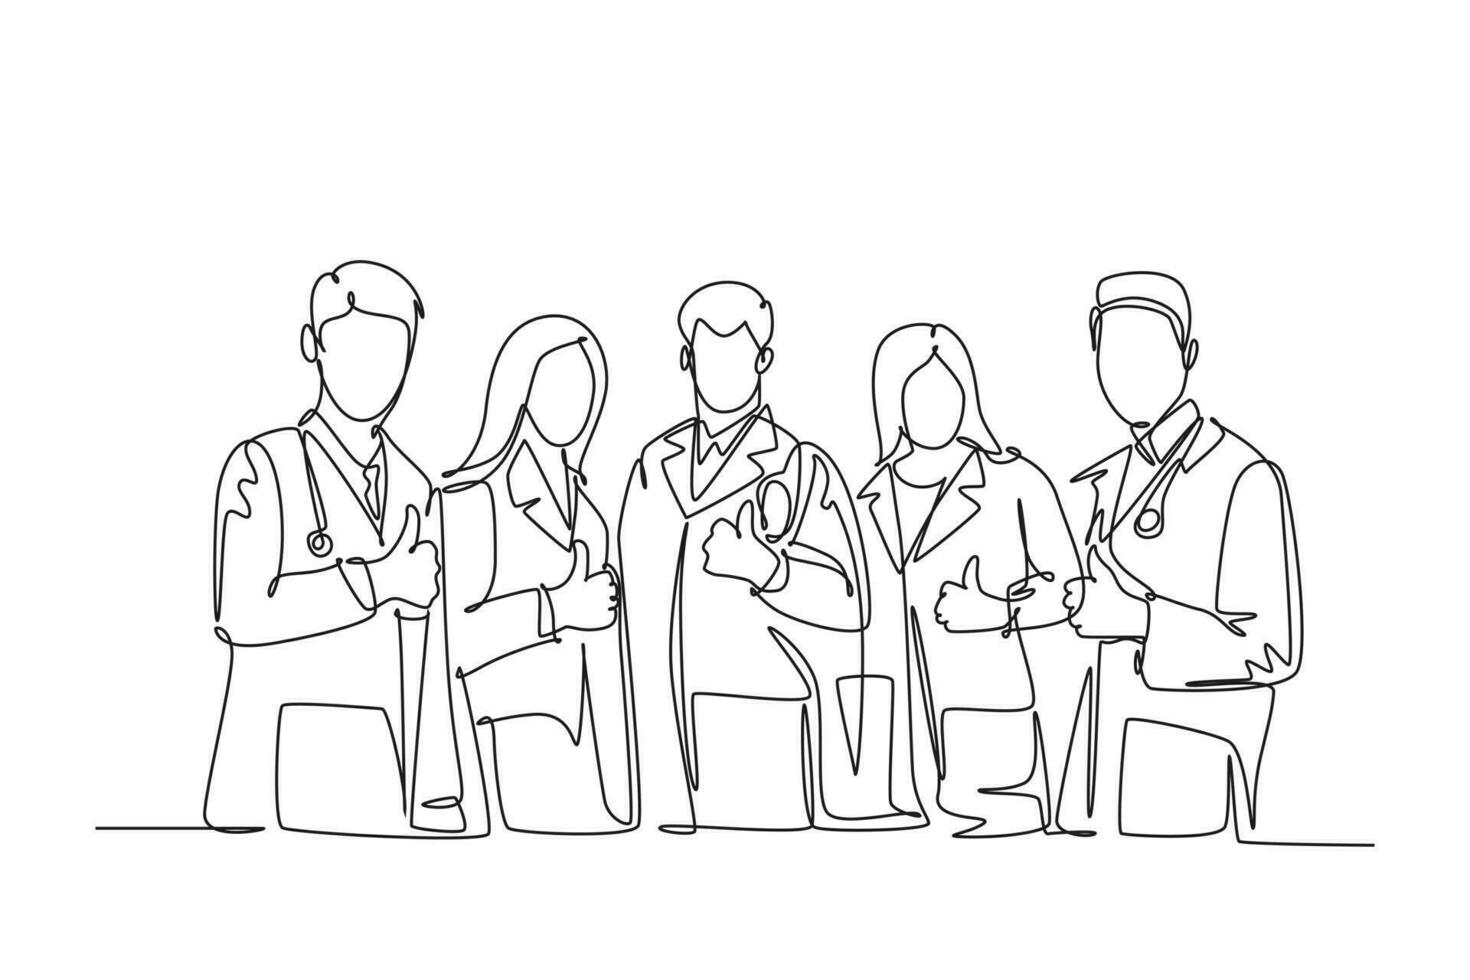 Single continuous line drawing groups of young smart happy doctors giving thumbs up gesture for best healthcare service in hospital. Medical team work. One line draw graphic design vector illustration